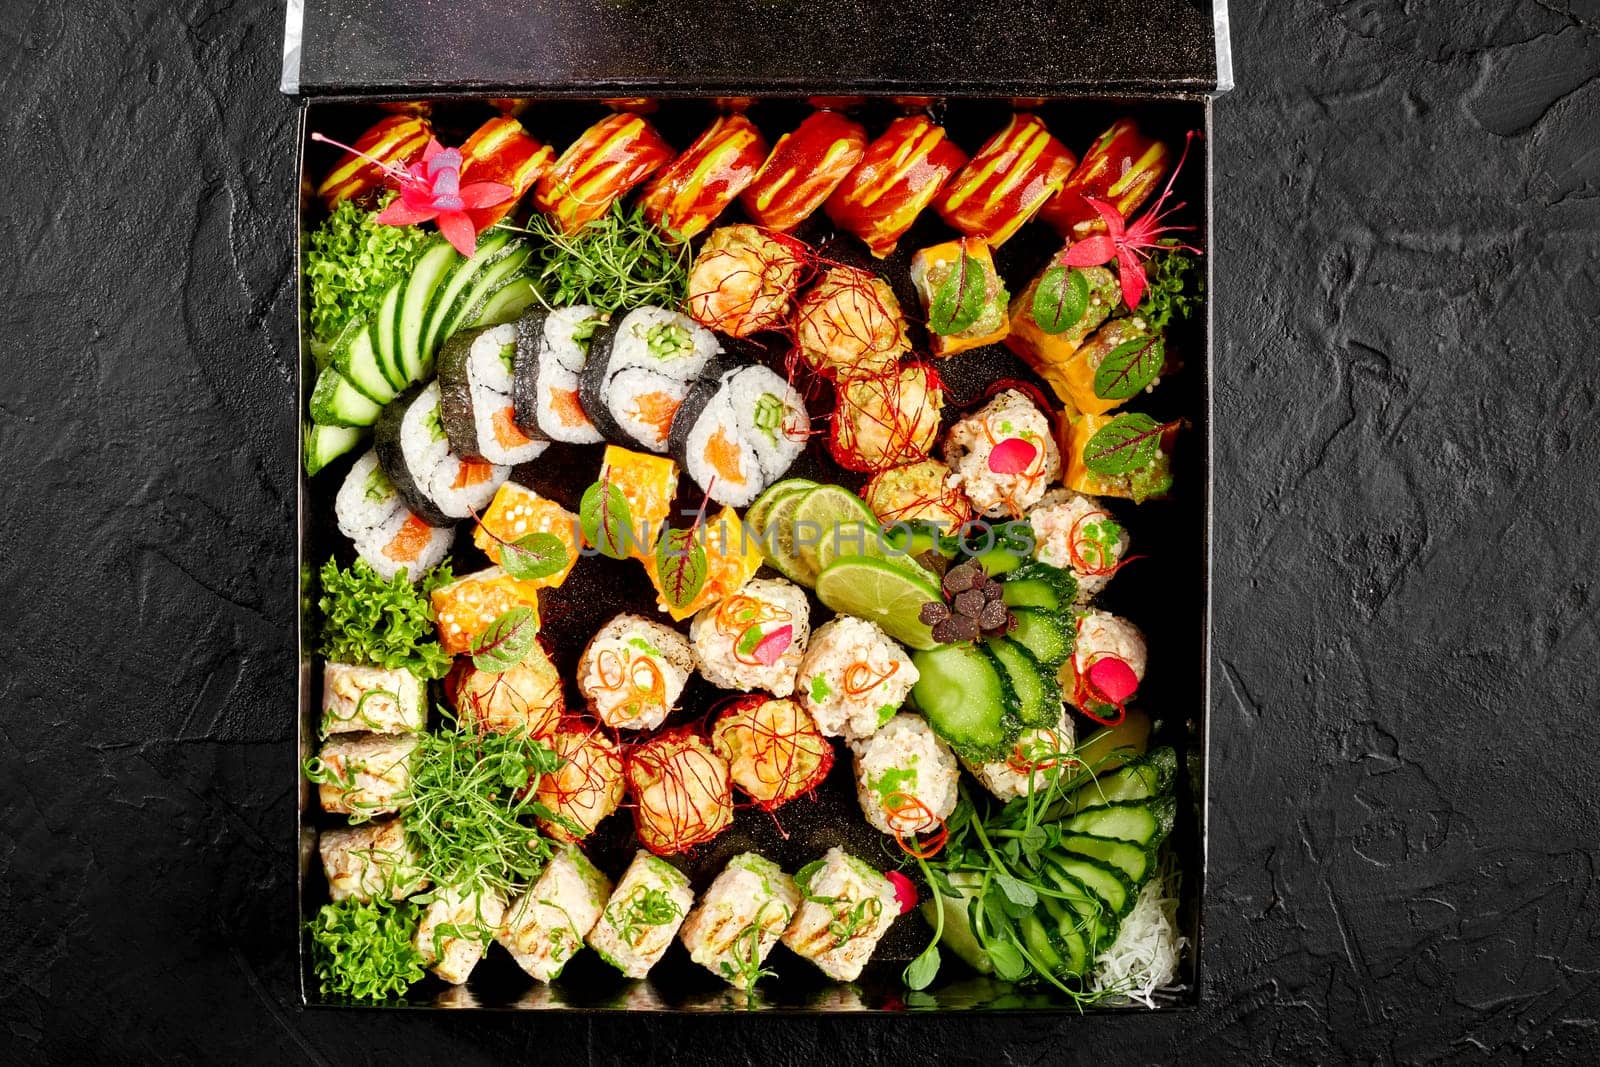 Delightful sushi set featuring array of rolls, embellished with fresh garnishes, vegetables and vibrant flowers, arranged in box against black textured background. Delivery or takeaway food concept